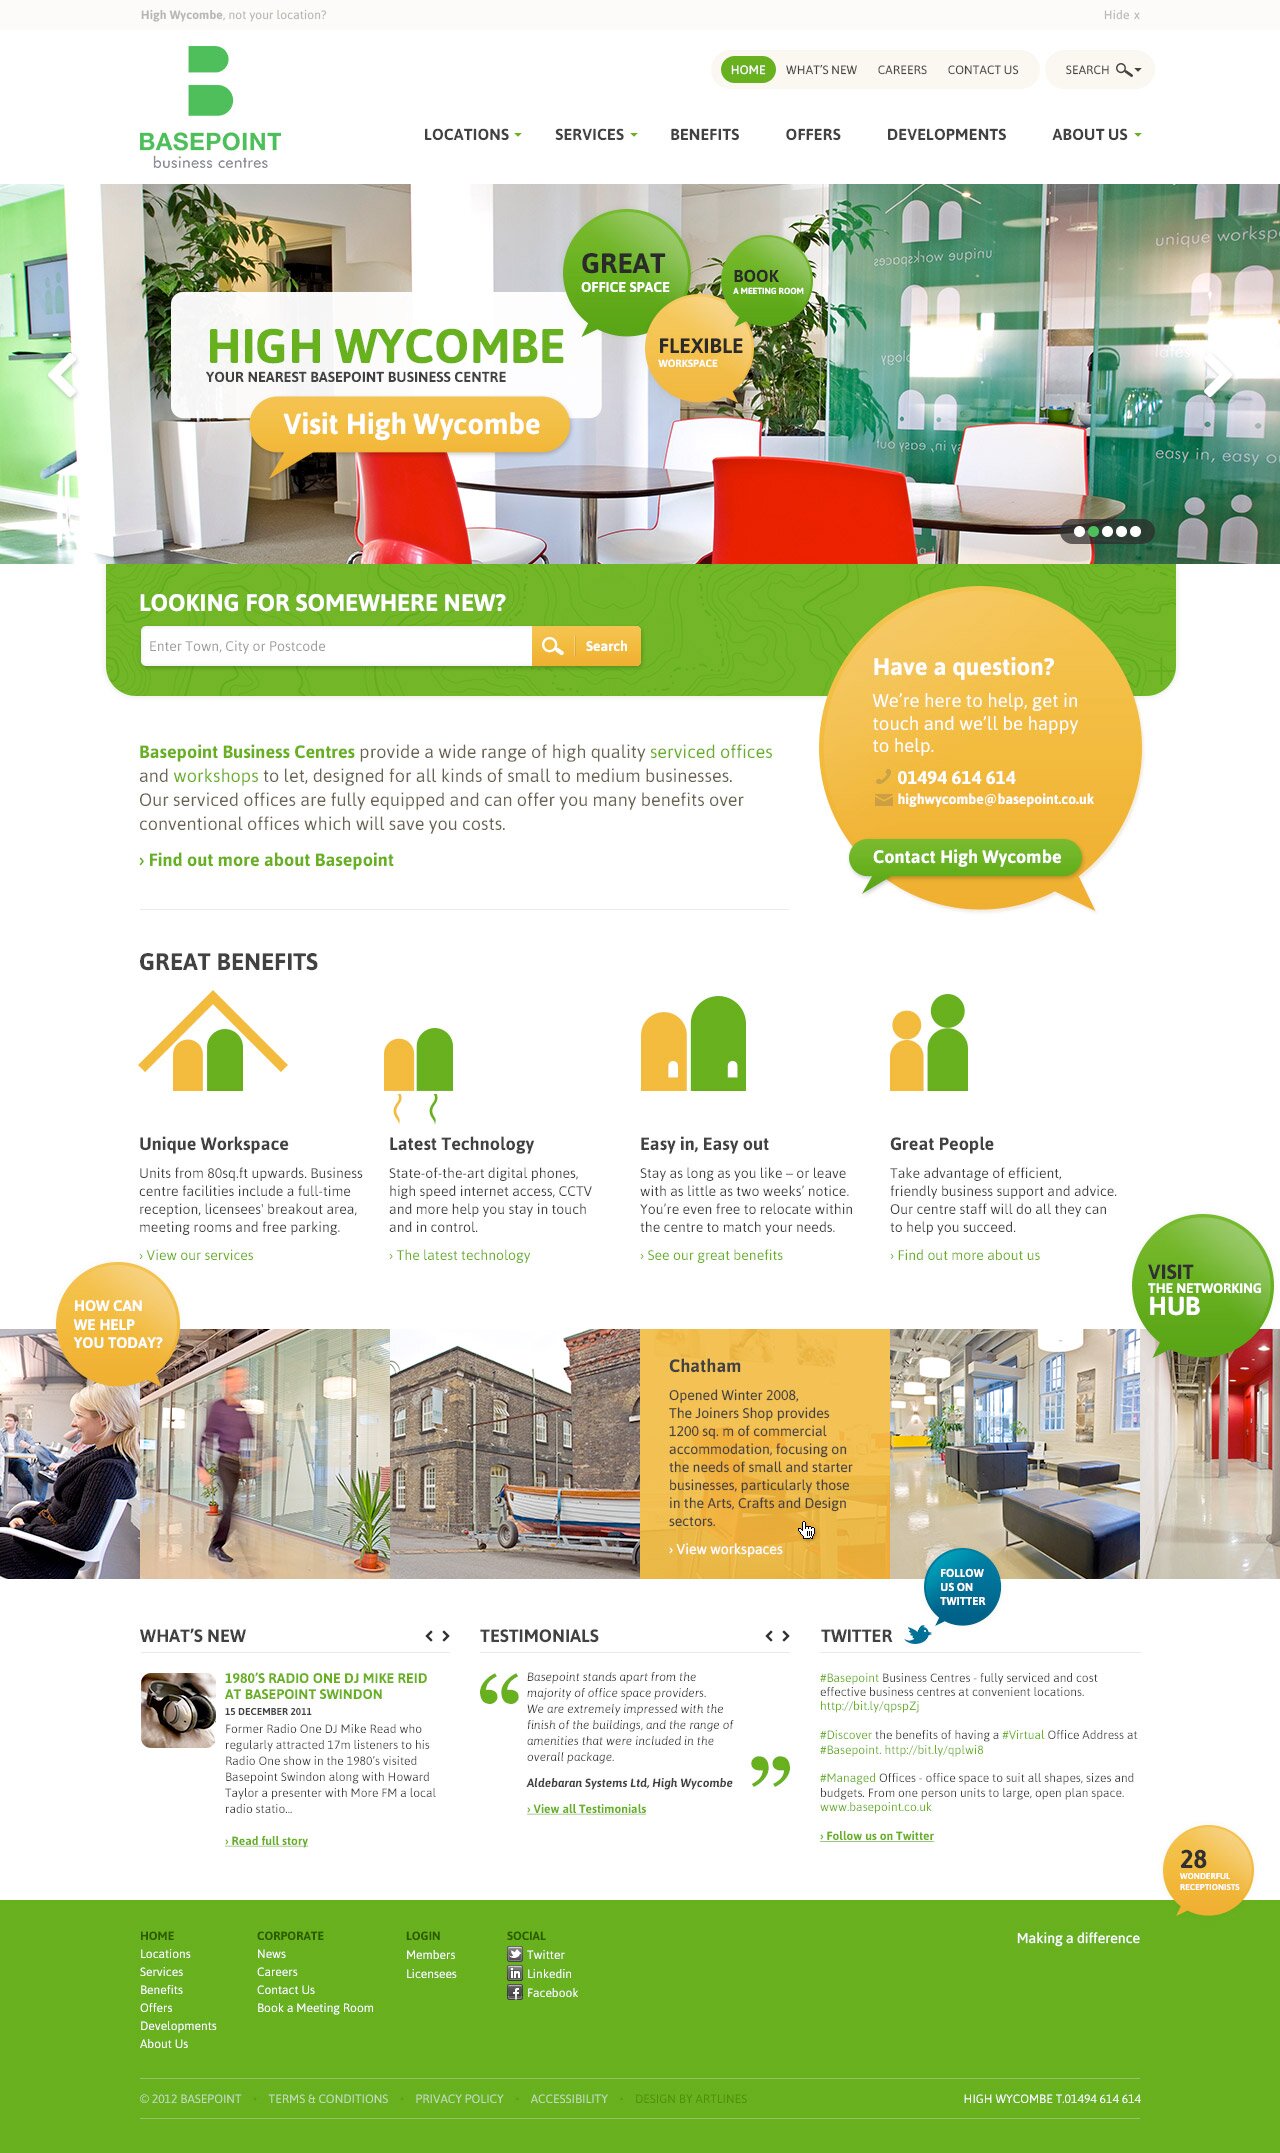 Basepoint Homepage